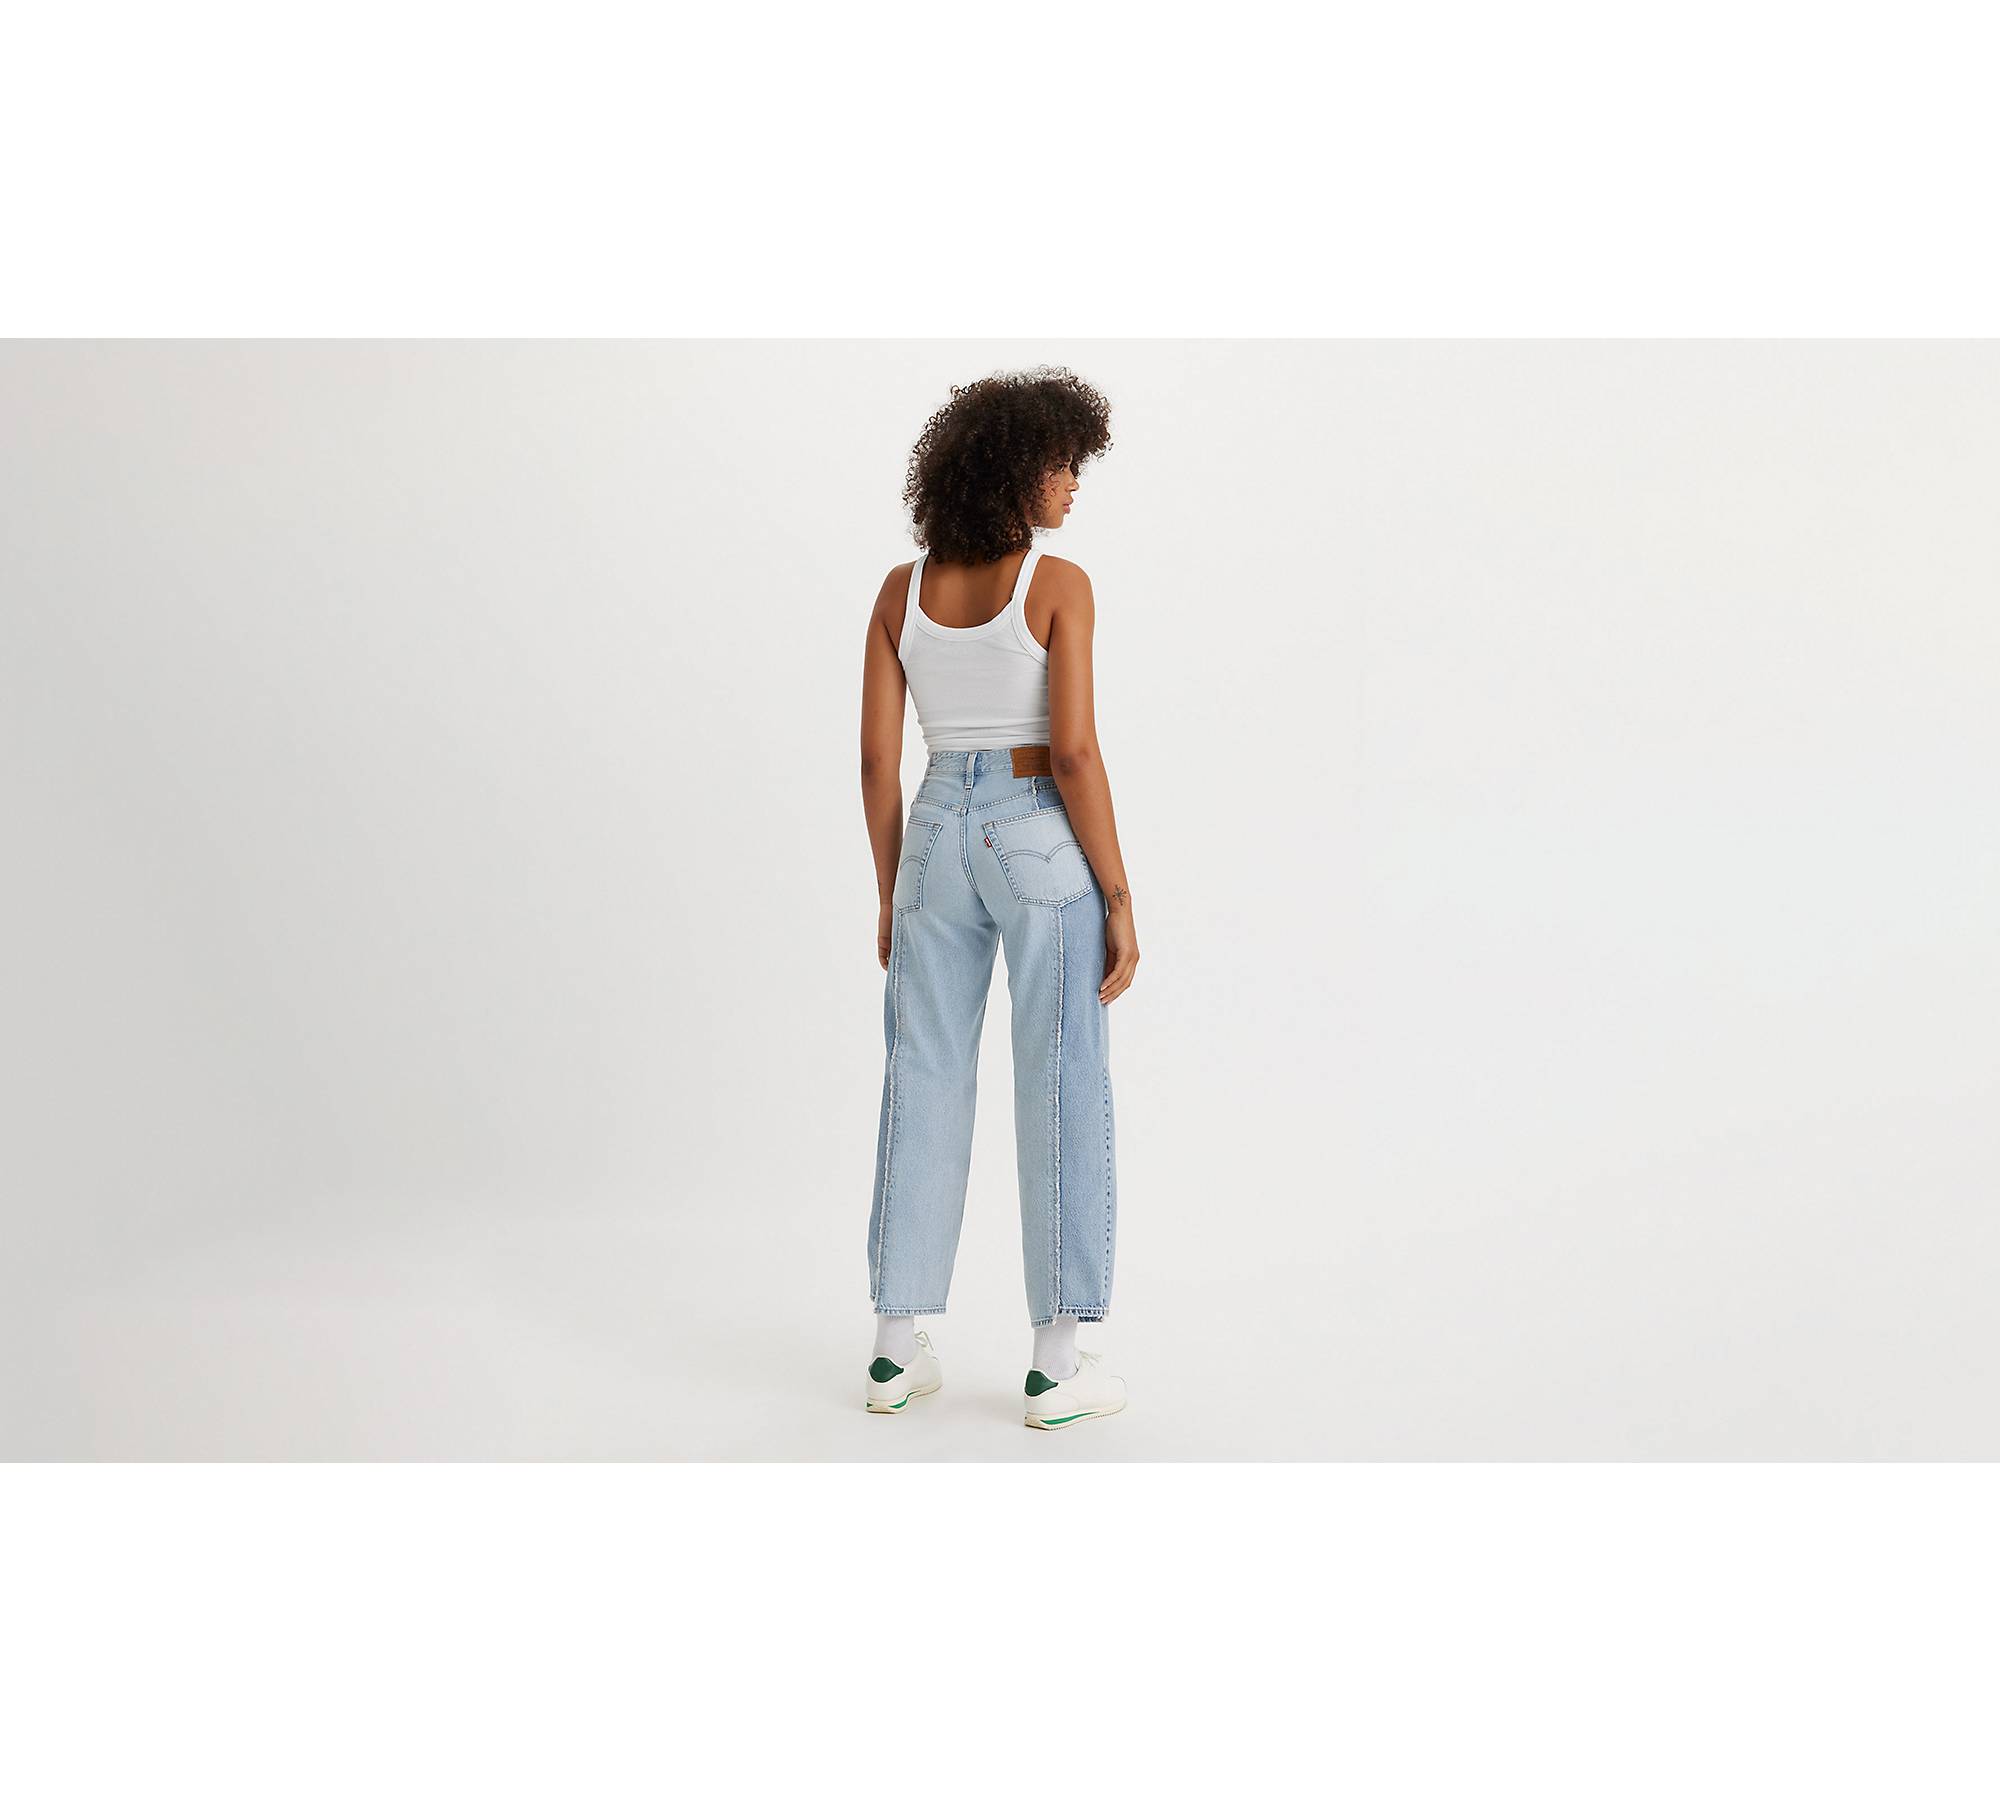 Baggy Dad Recrafted Women's Jeans - Medium Wash | Levi's® US